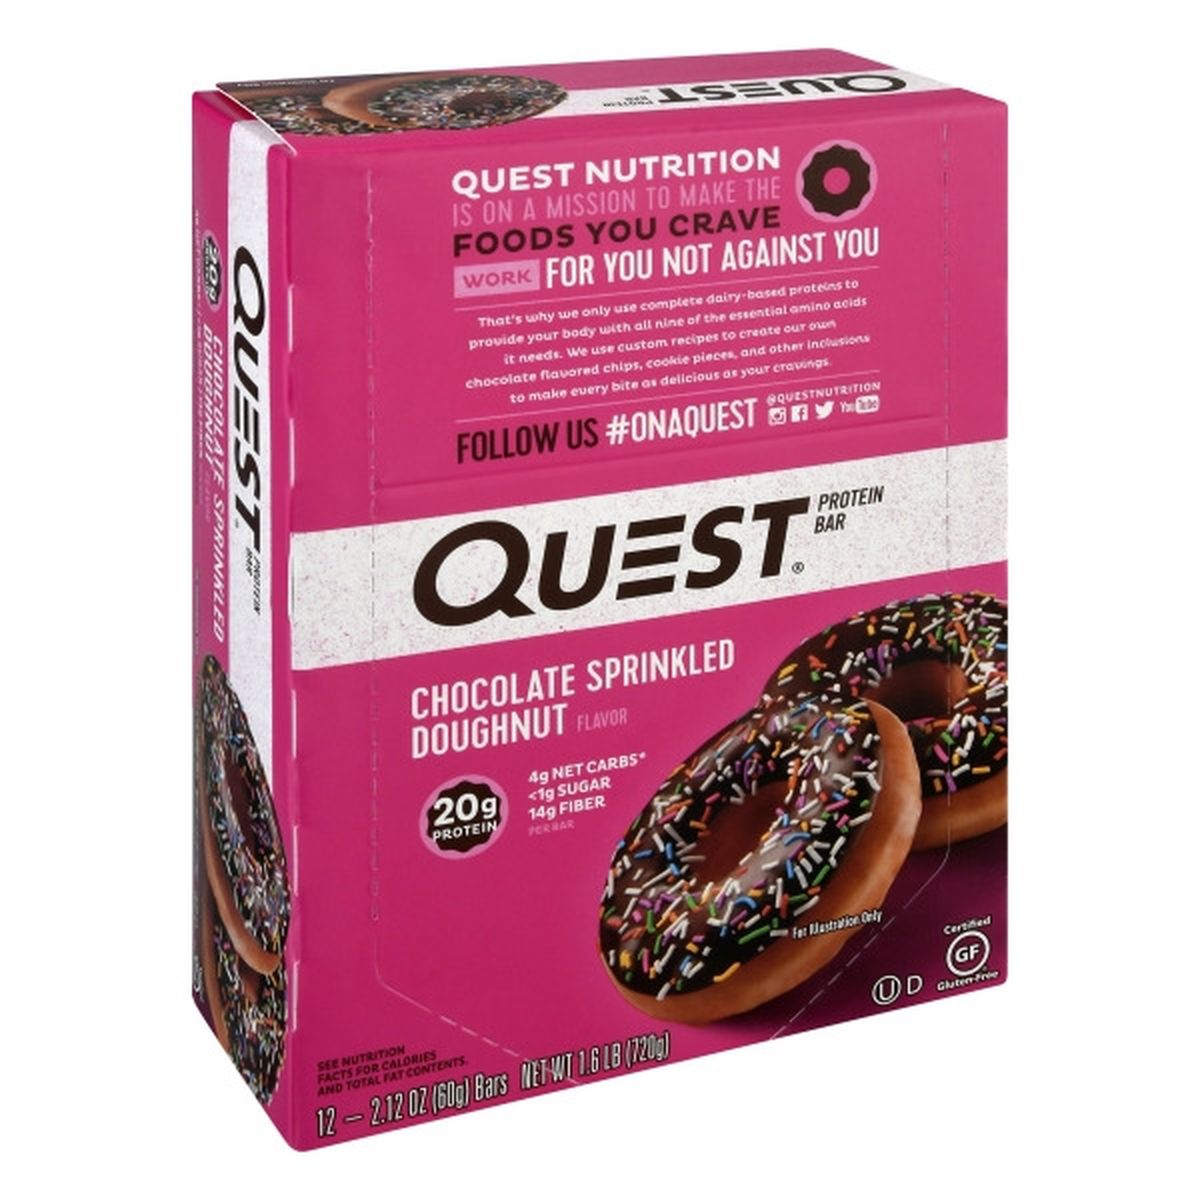 Calories in Quest Protein Bar, Chocolate Sprinkled Doughnut Flavor,